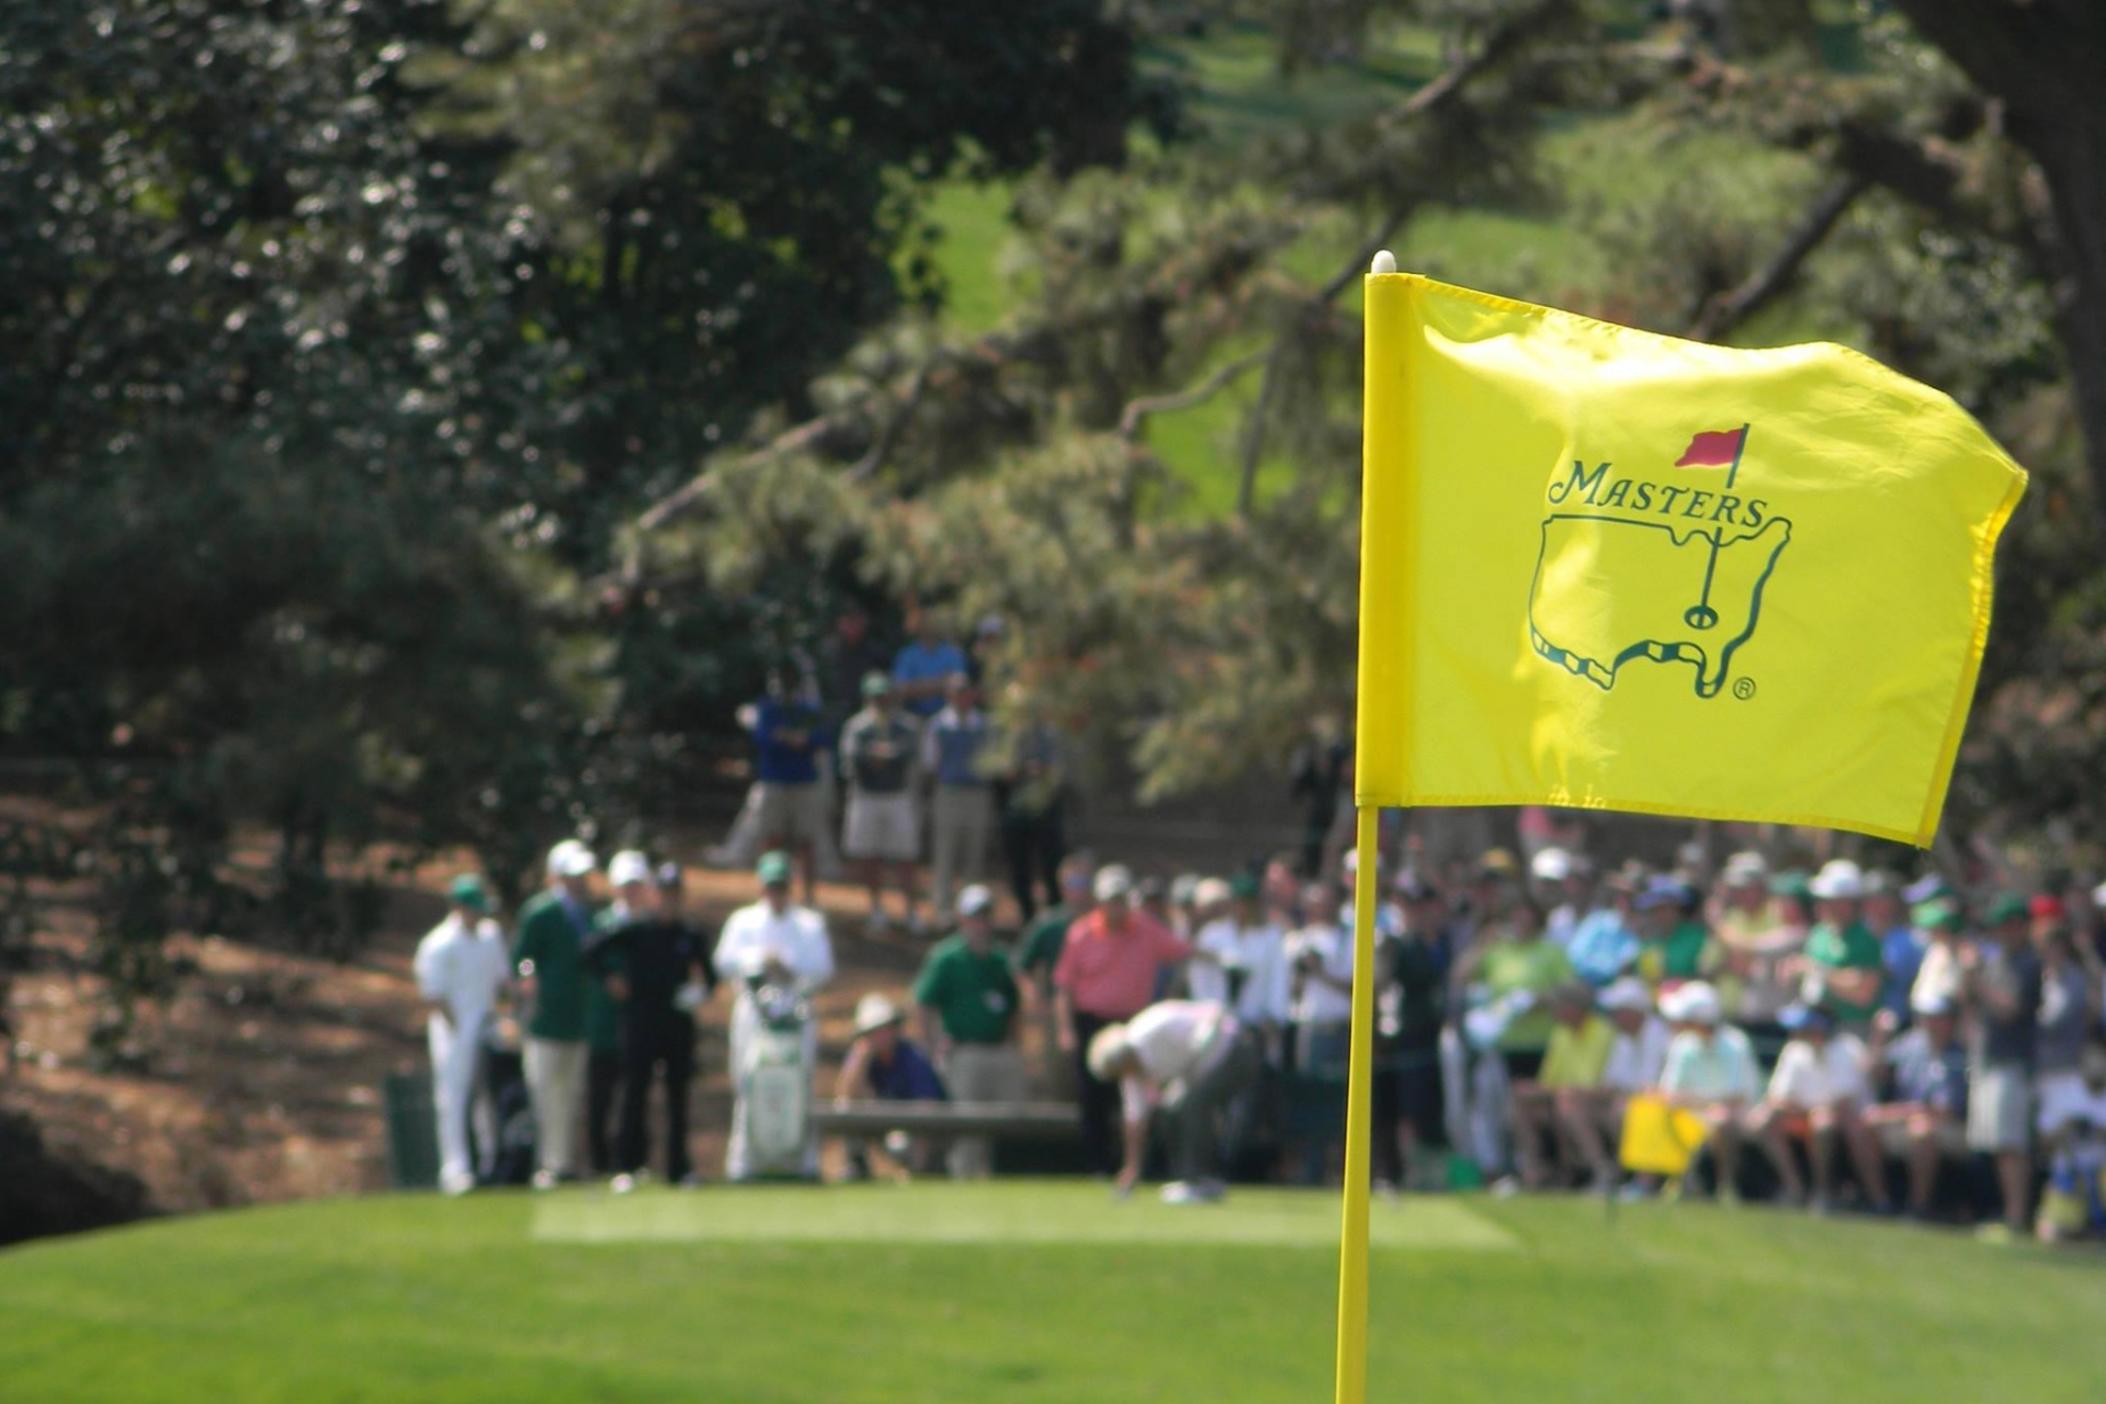 A view of a flag at a hole on Augusta National Golf Course during The Masters Tournament.